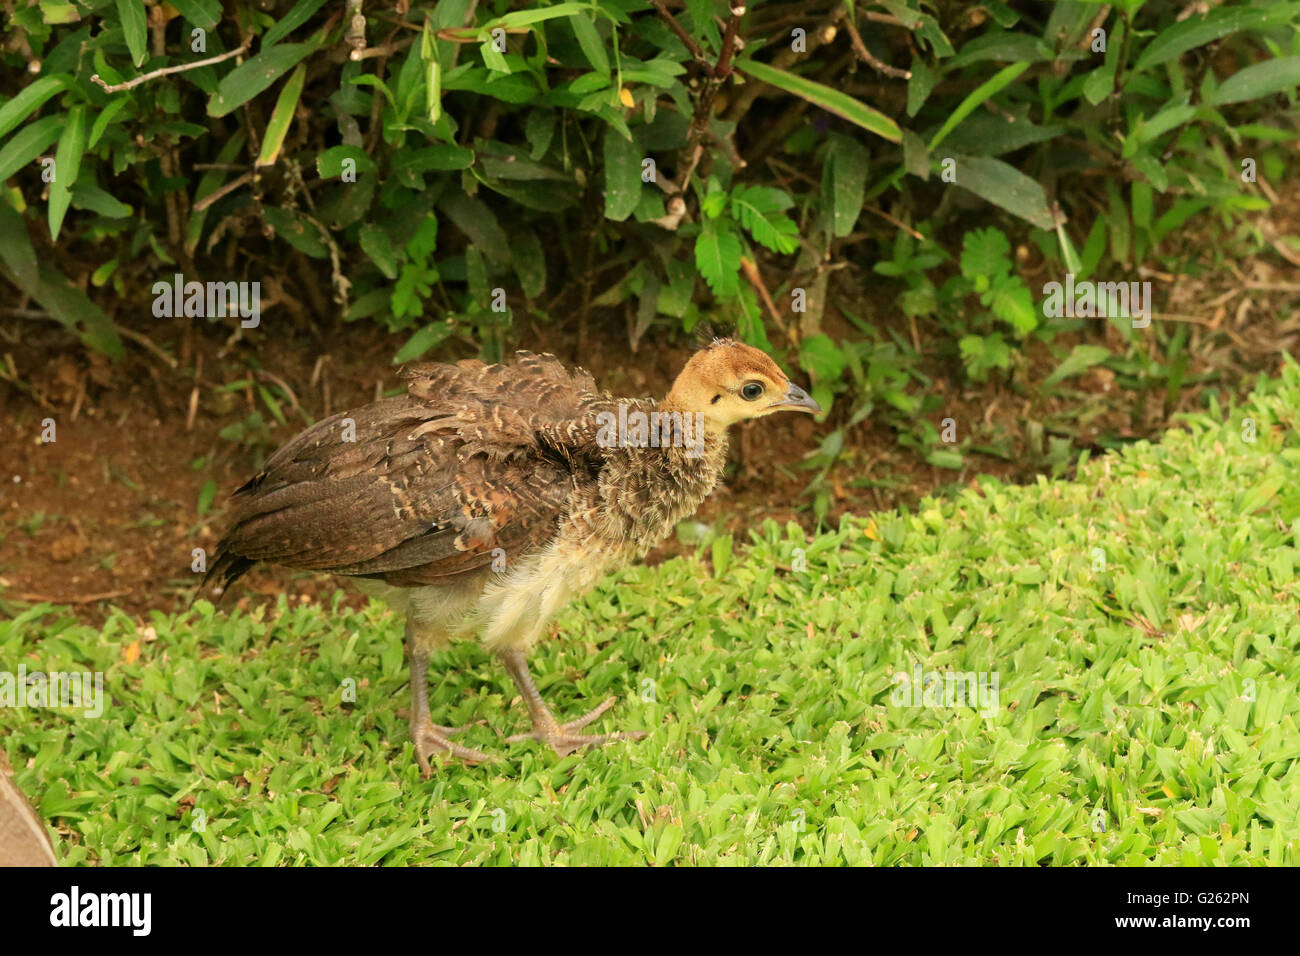 Baby peacock, or peachick, in the wild in Jamaica Stock Photo